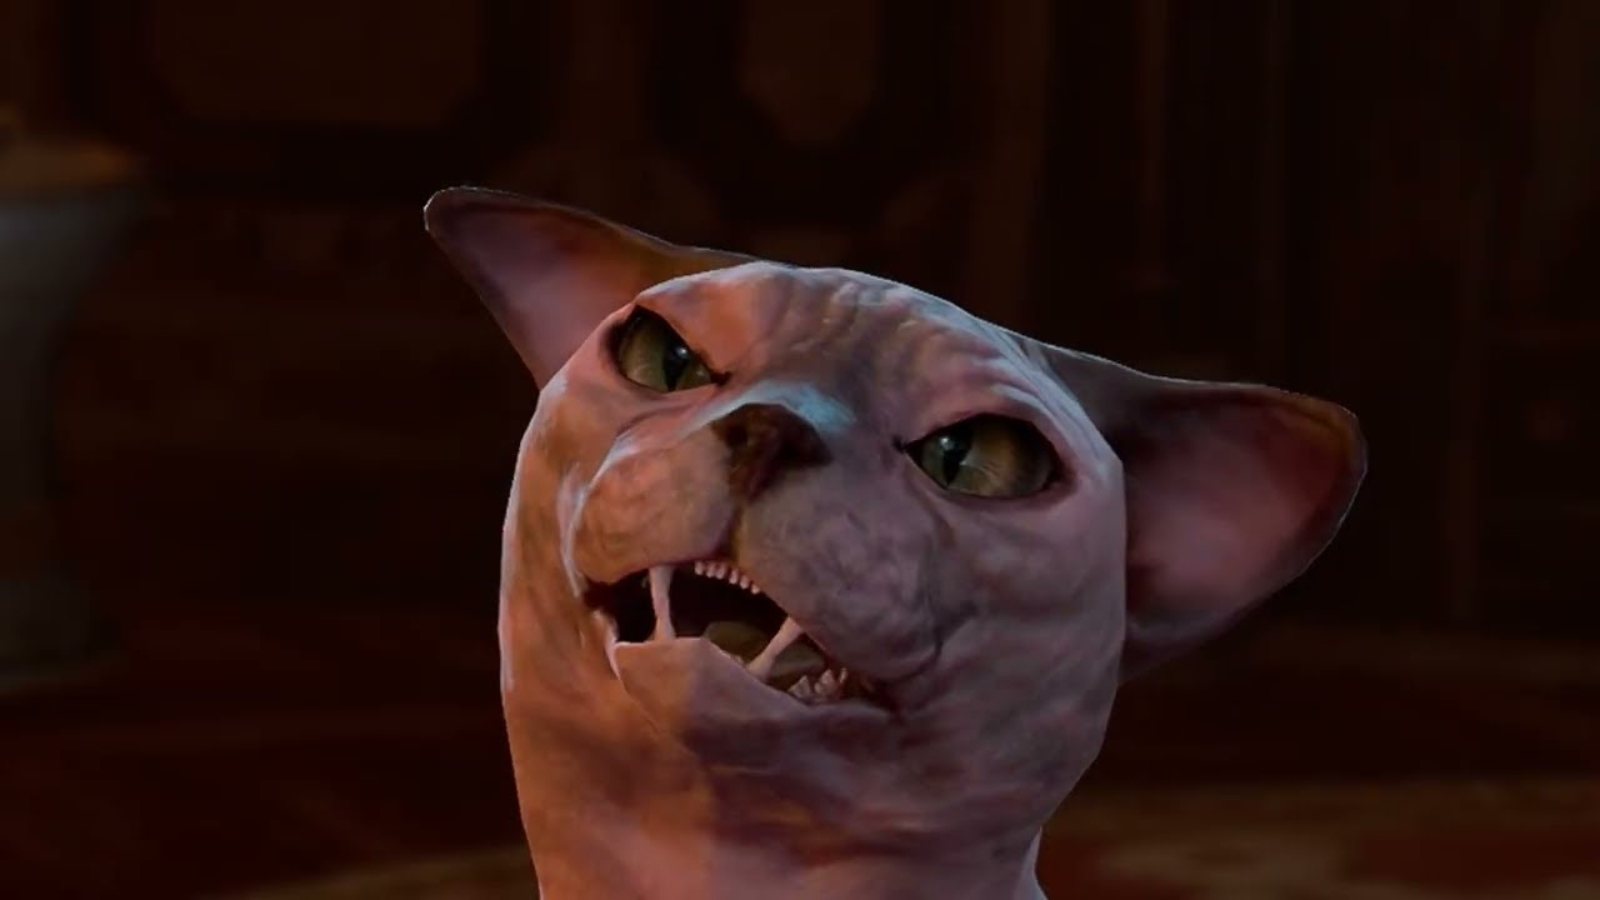 Image for article Baldurs Gate 3 Honor Mode run goes hilariously wrong after player tries to feed cat  Dexerto